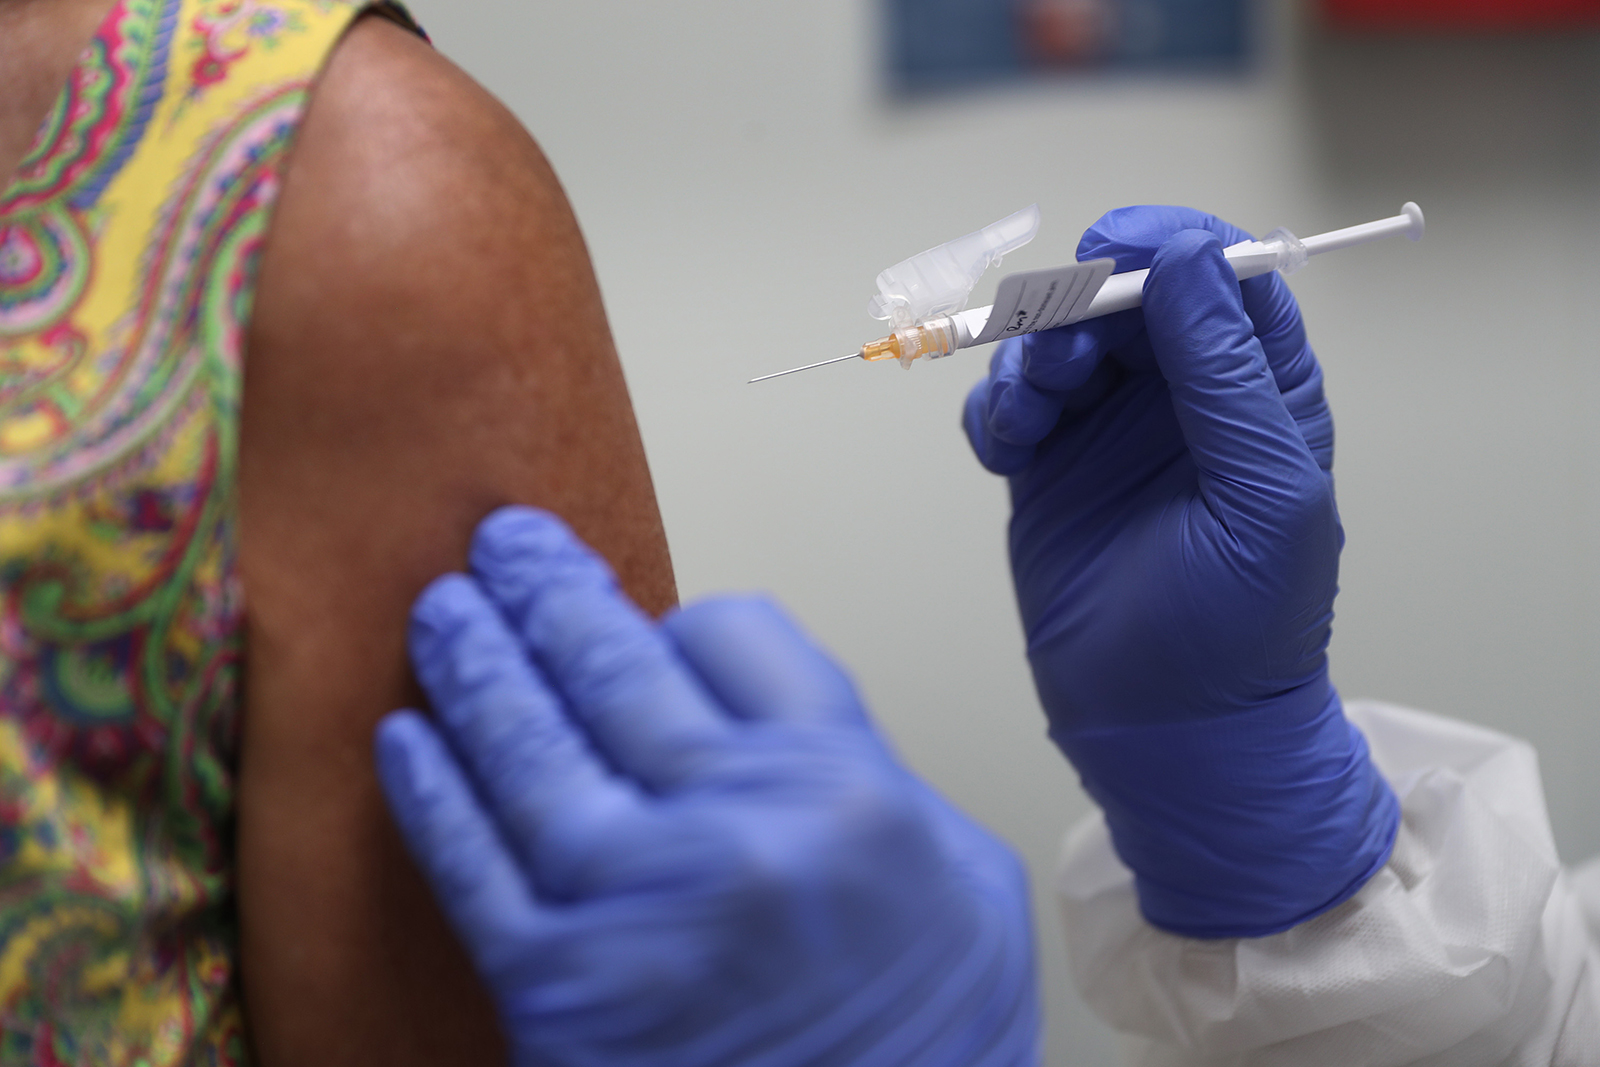 A nurse administers a Covid-19 vaccination as part of a vaccine study at Research Centers of America on August 7 in Hollywood, Florida. 